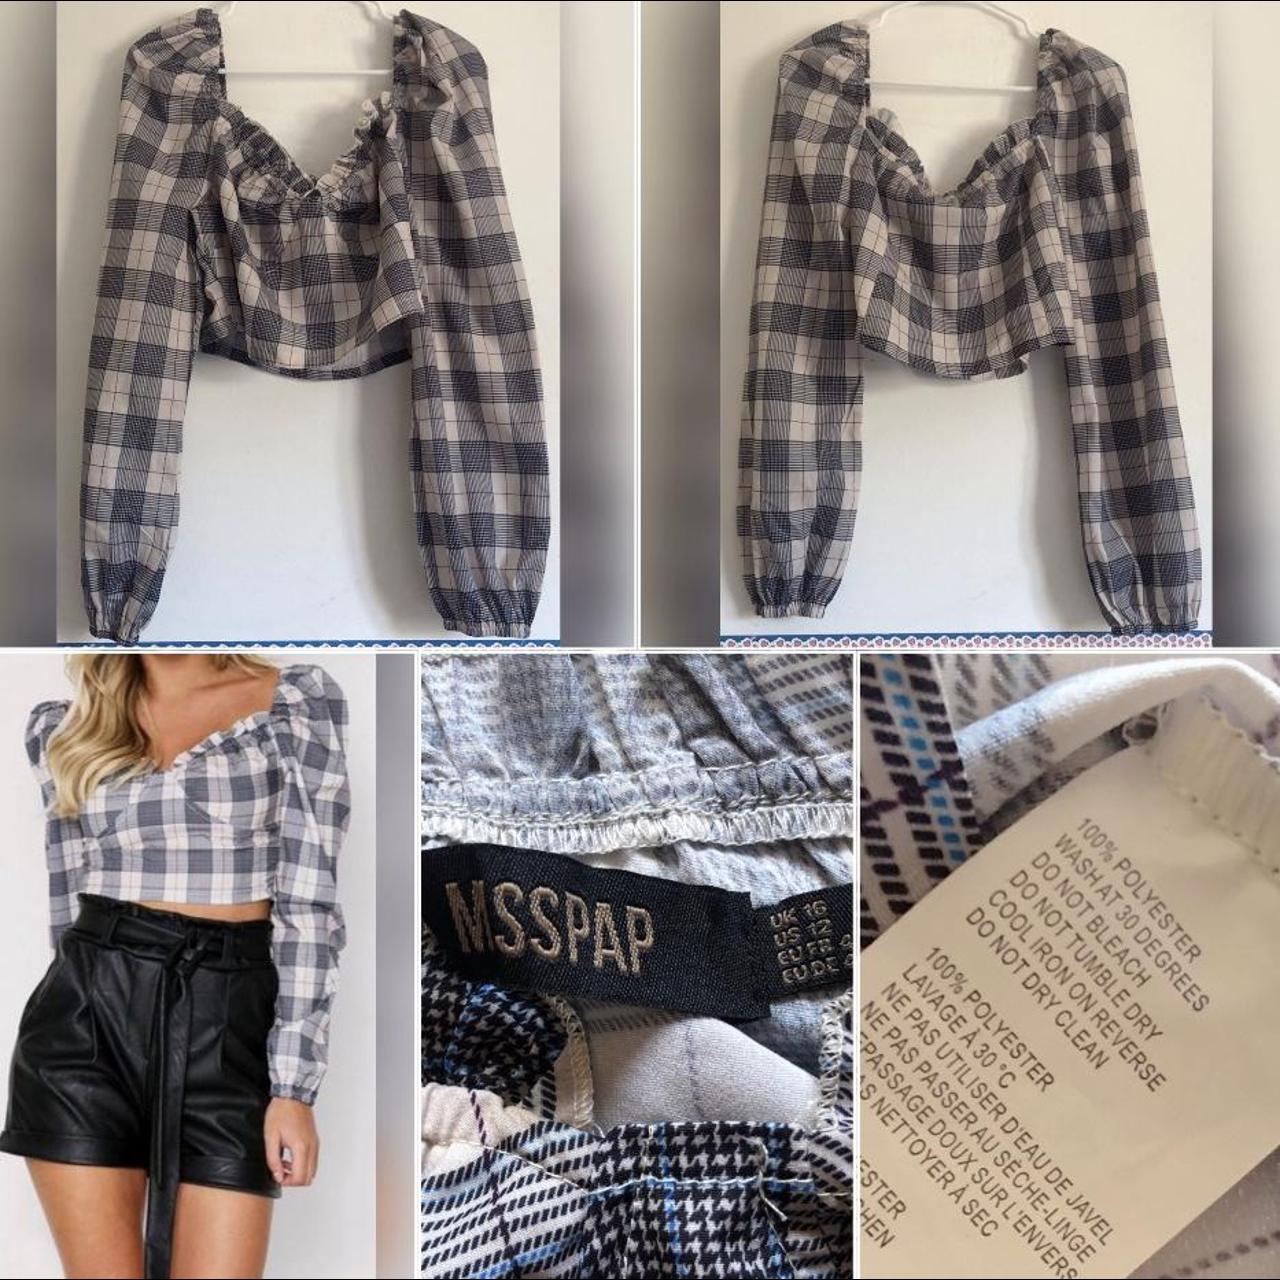 Product Image 4 - miss pap plaid crop top

lightweight